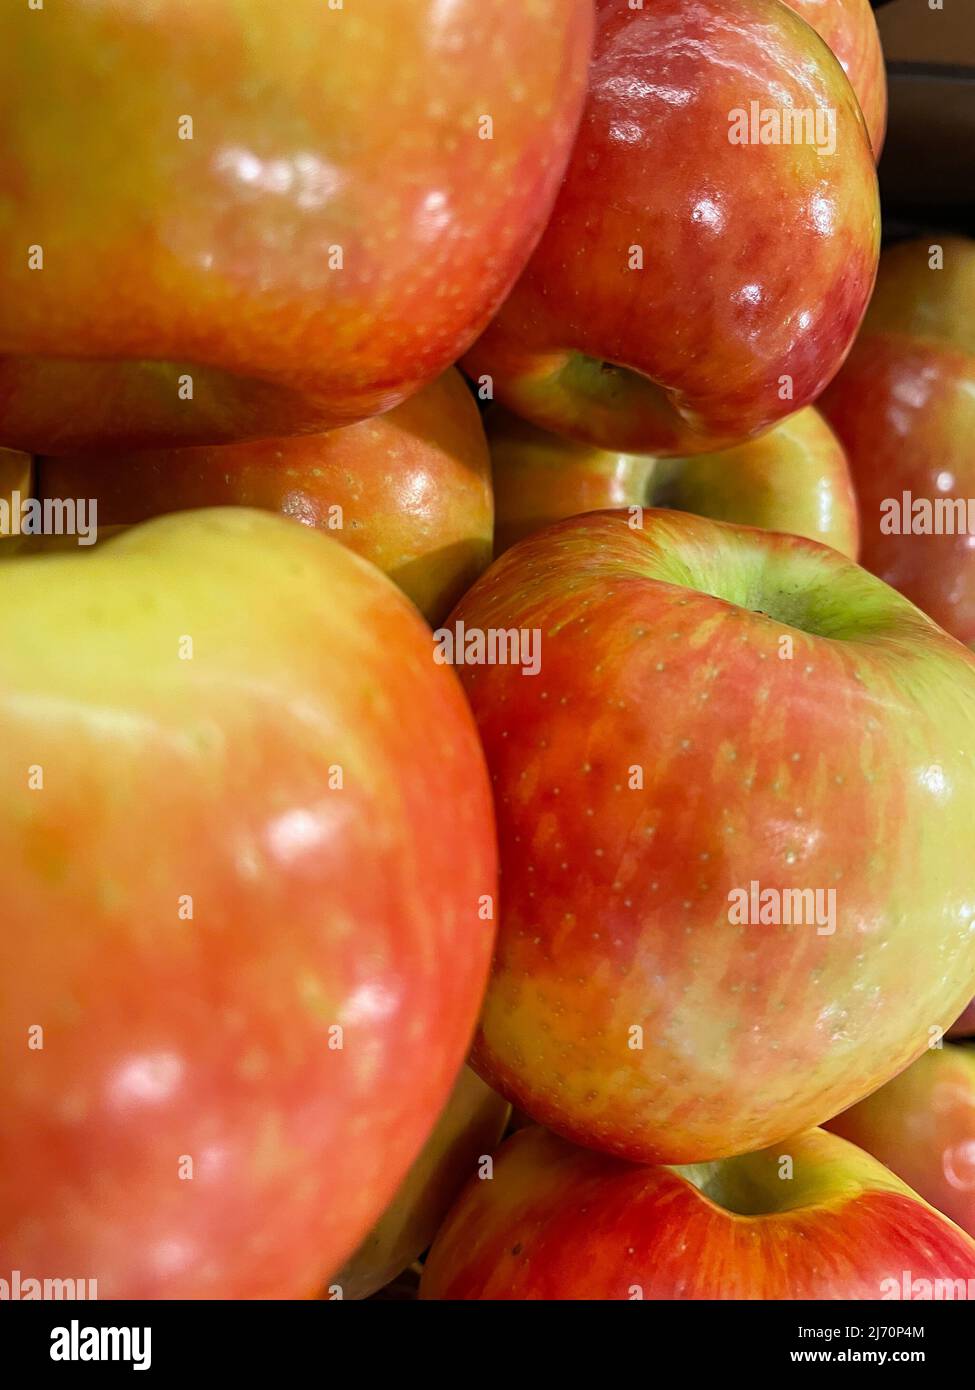 Washington Red apples on display in a retail store produce department Stock Photo